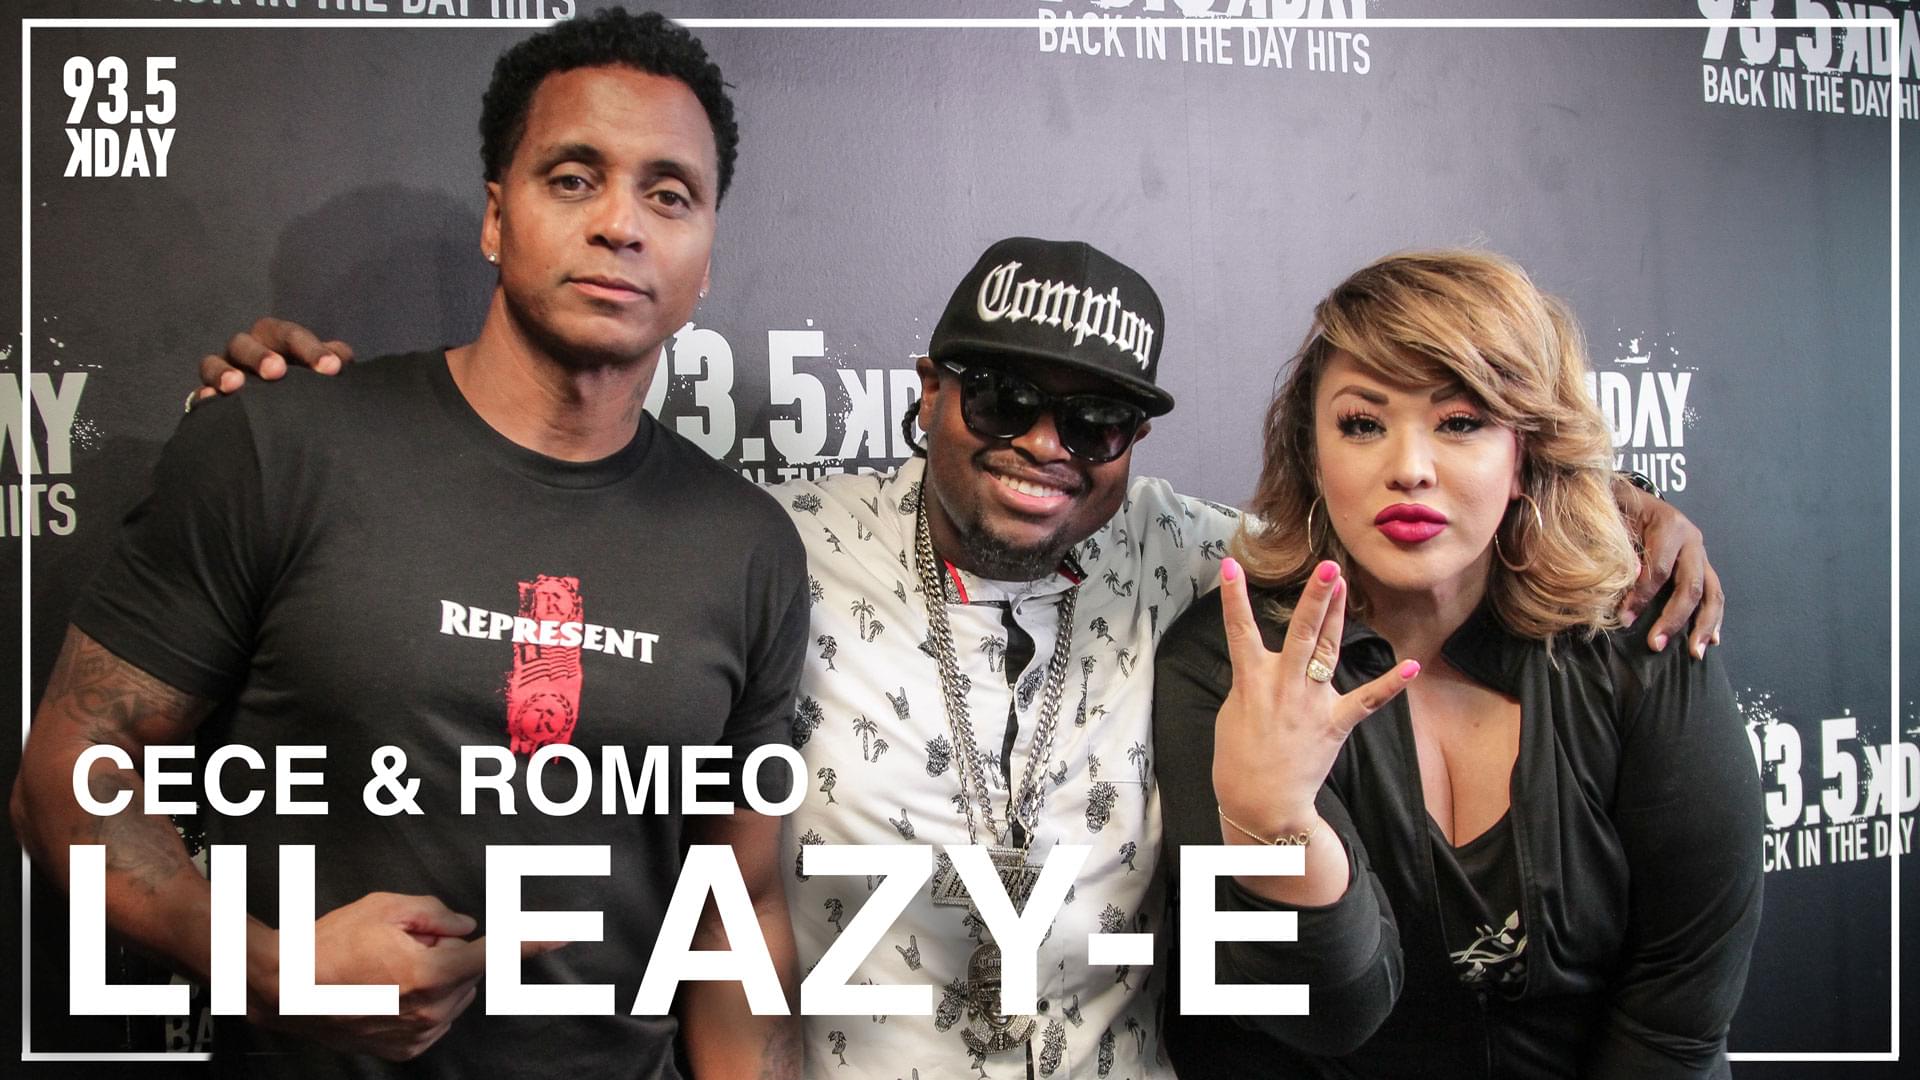 Lil Eazy-E On Pressure To Uphold Eazy E’s Legacy w/ New Tombstone Unveiling + Growing Up Hip Hop